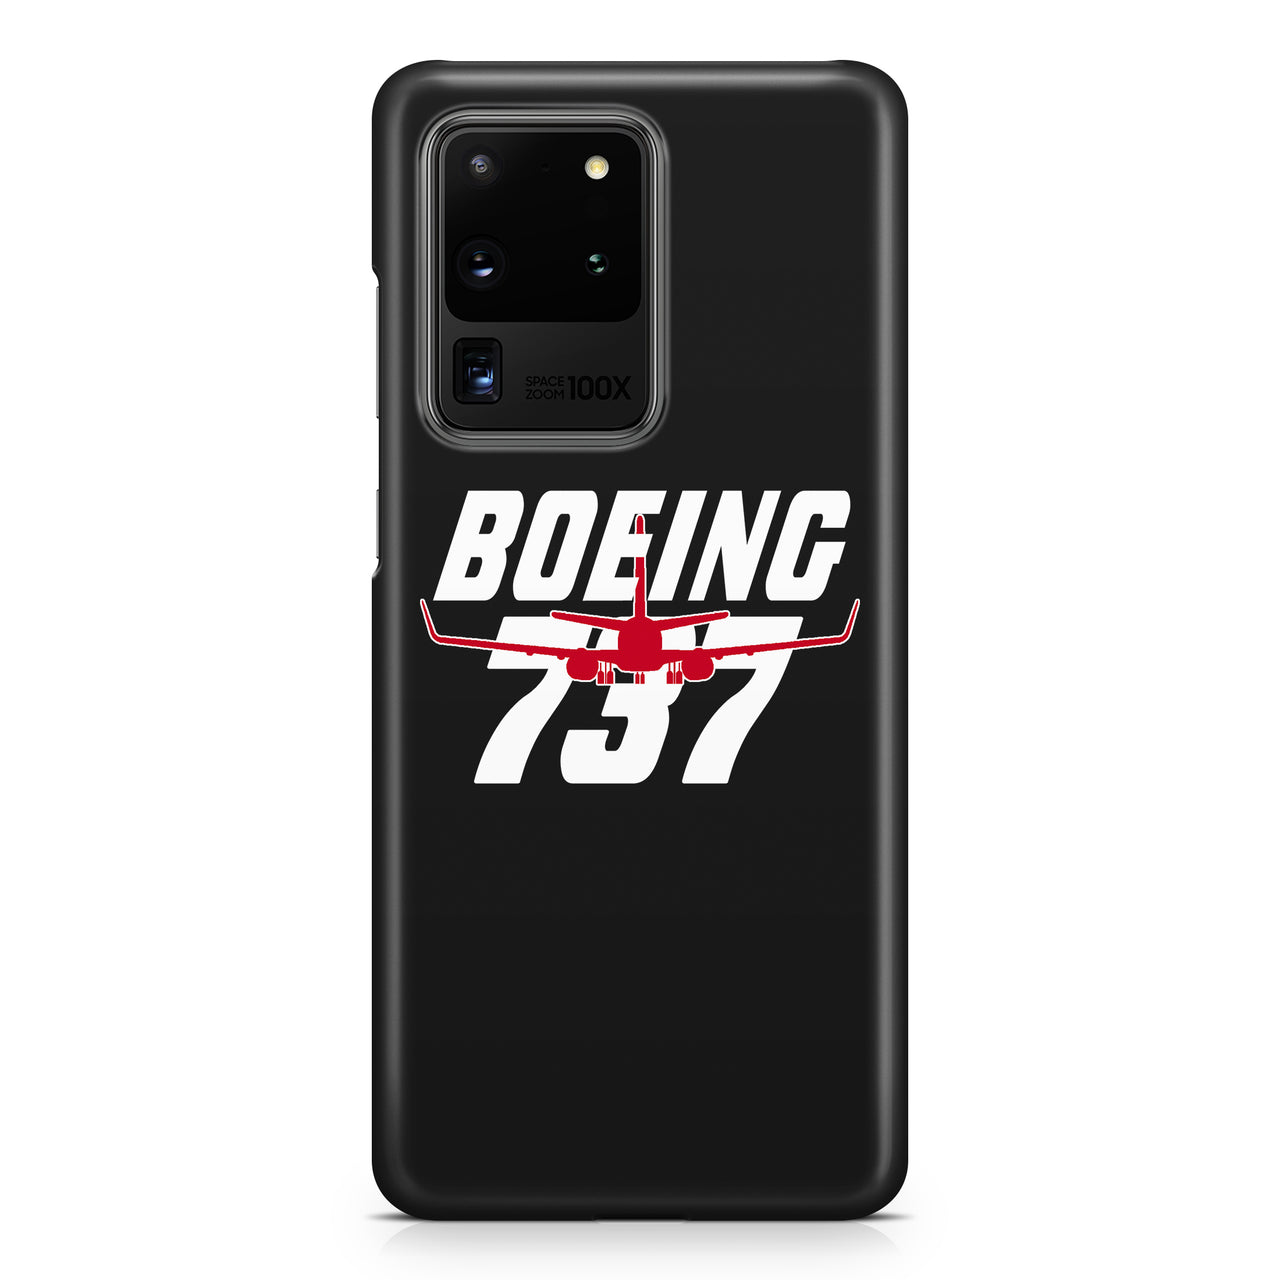 Amazing Boeing 737 Samsung S & Note Cases